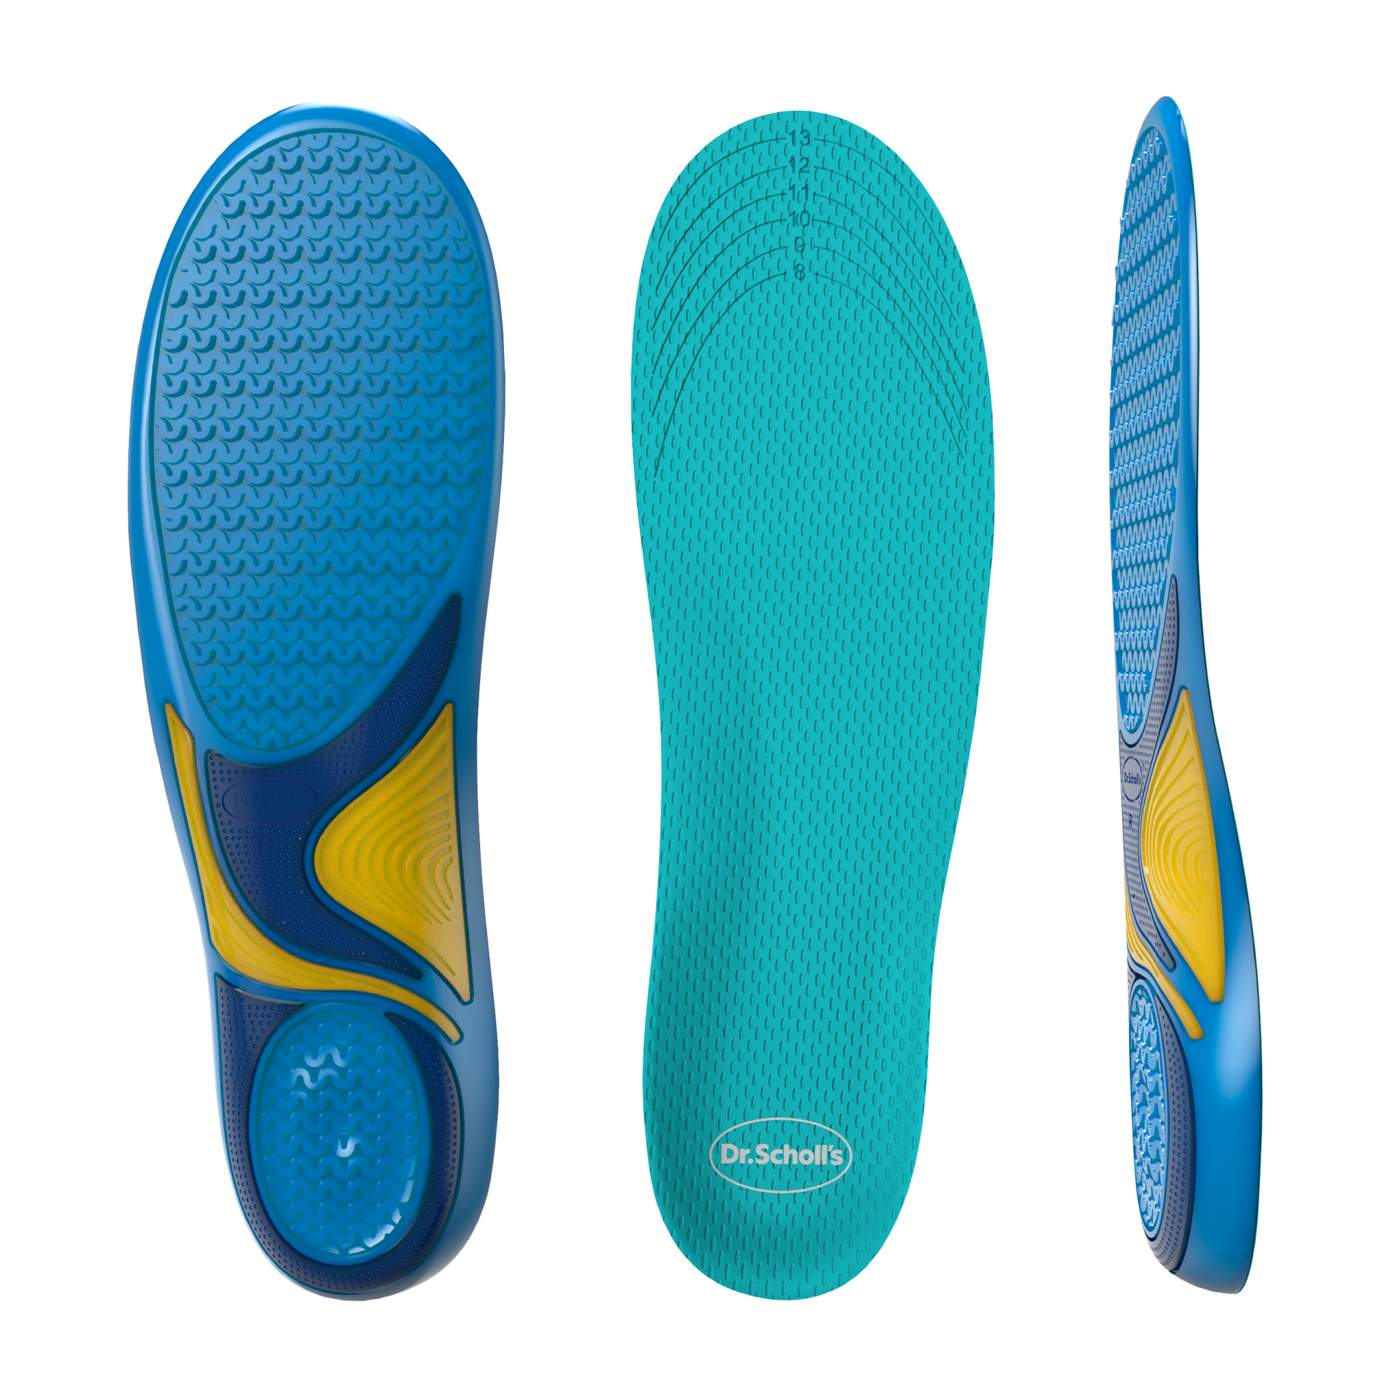 Dr. Scholl's Comfort and Energy Massaging Gel Insoles, Men's Size 8-14 -  Shop Foot Care at H-E-B